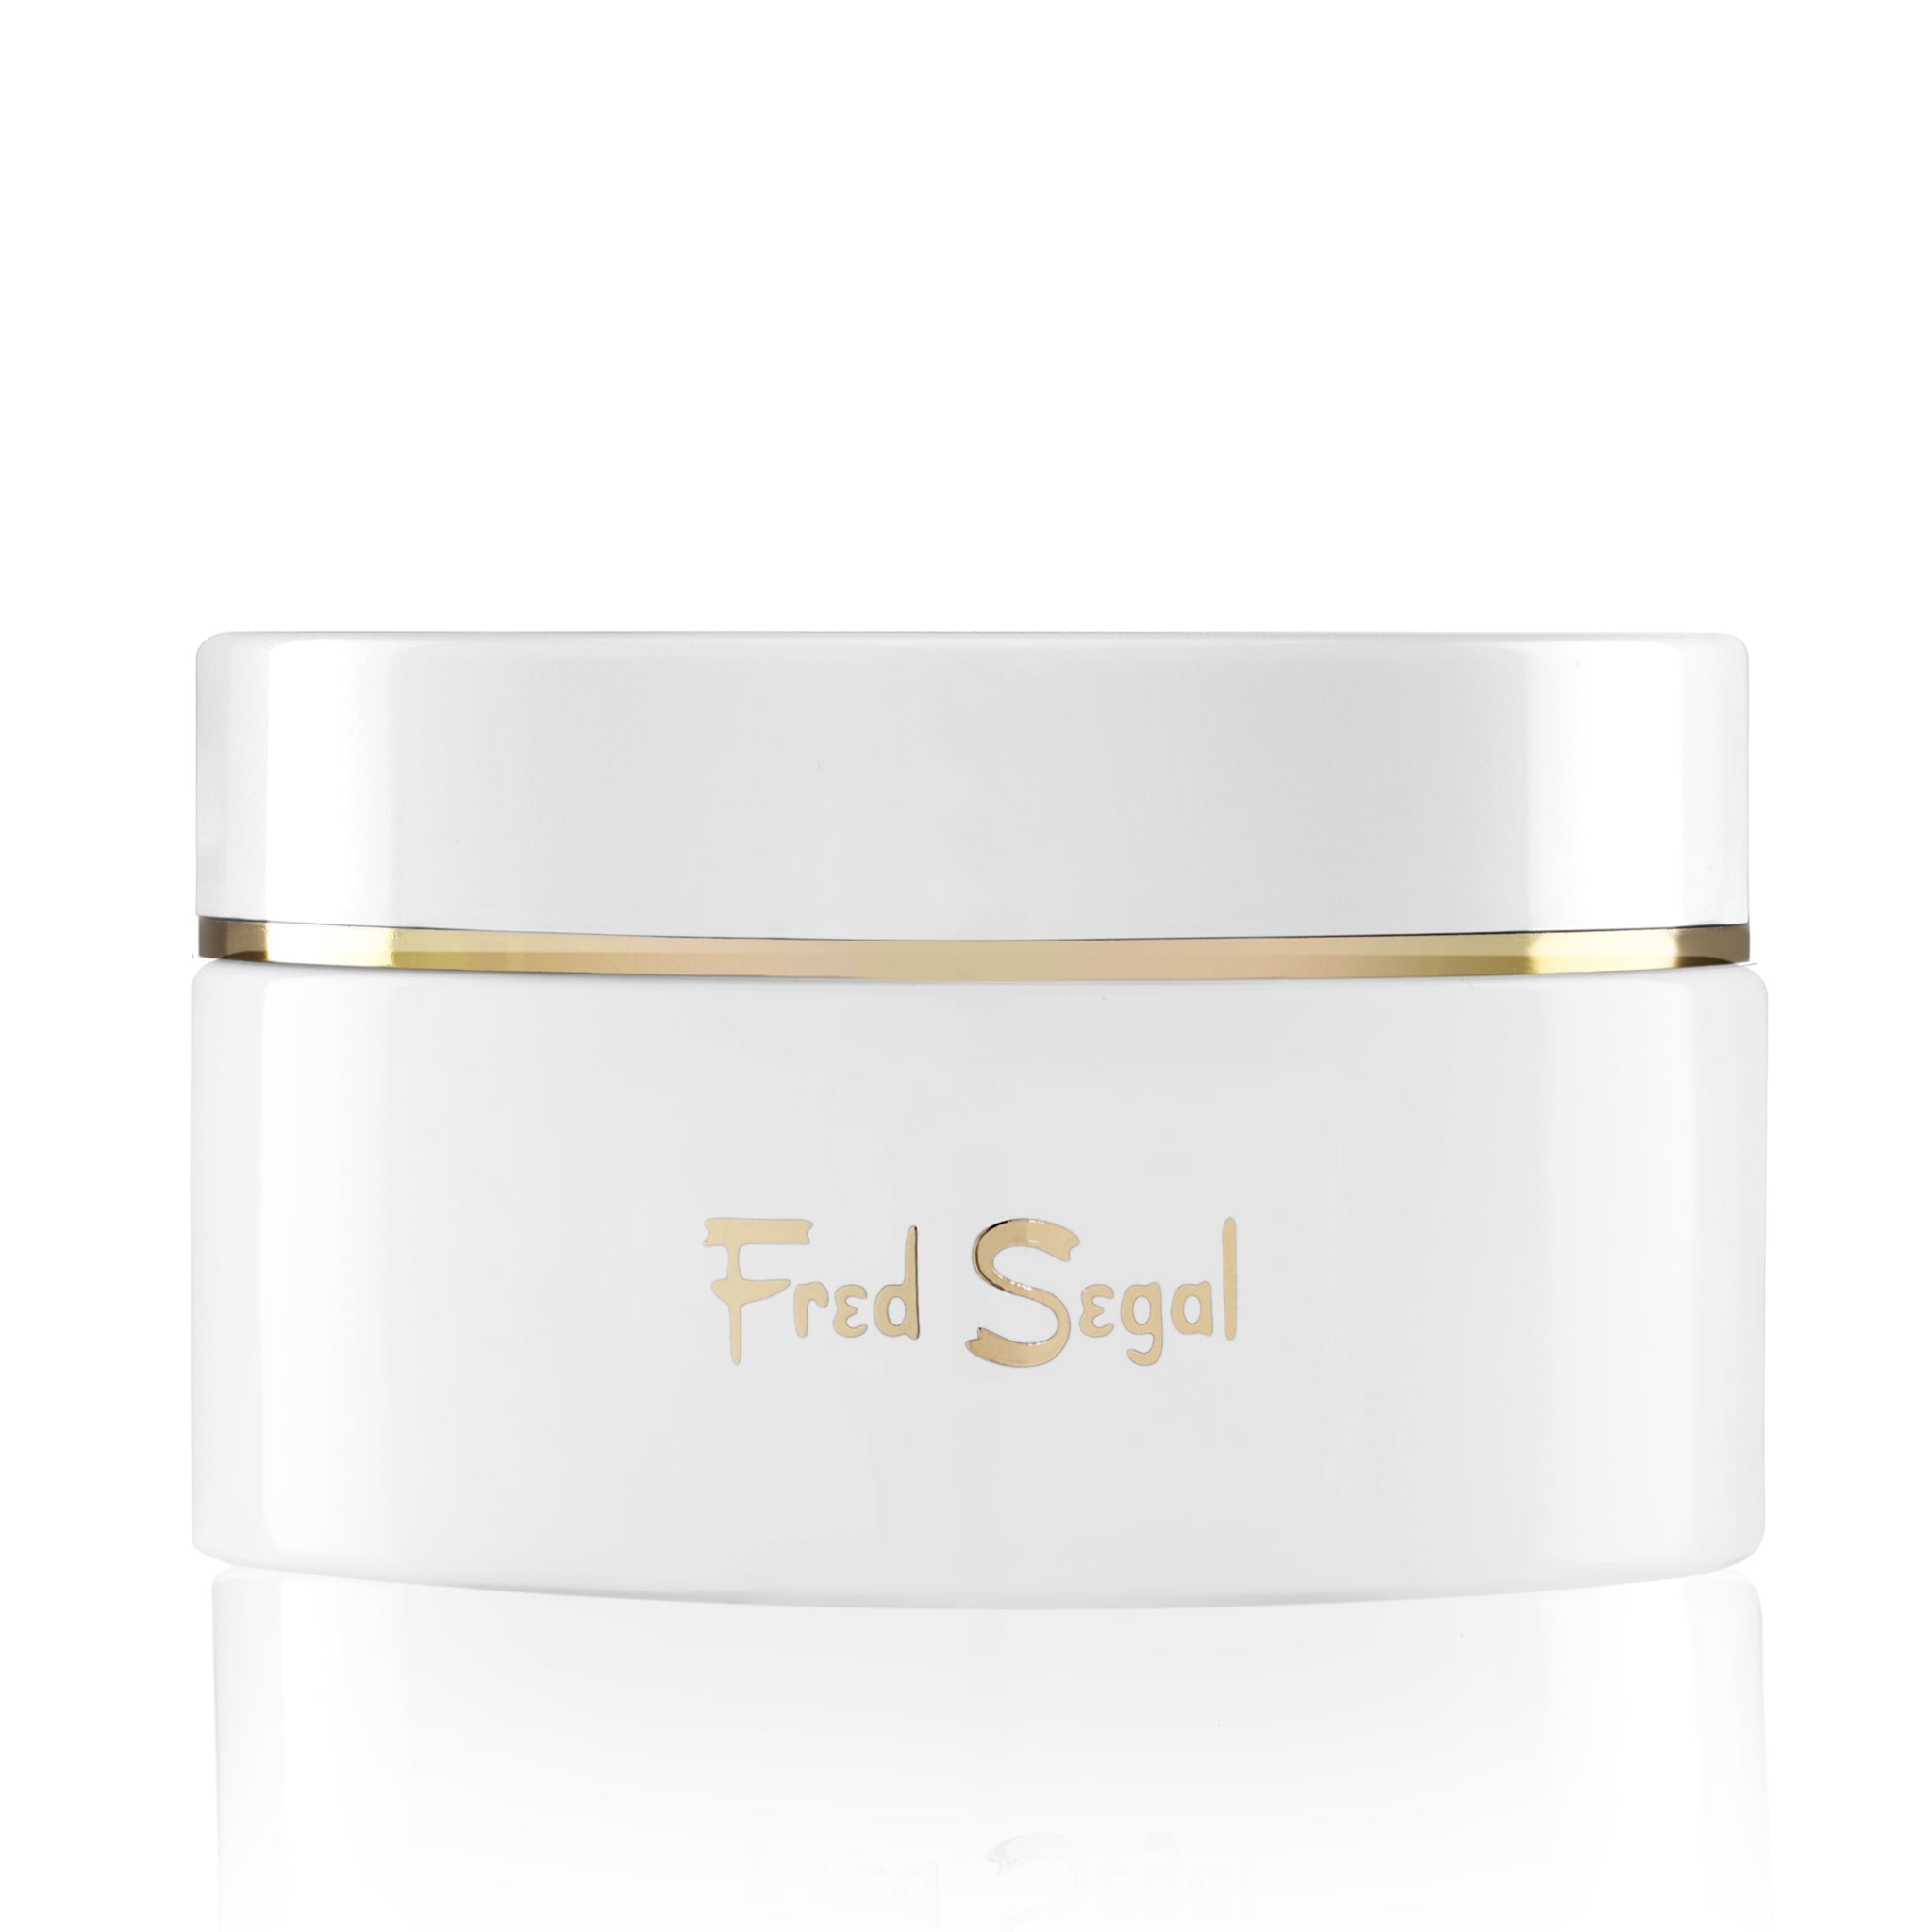 HEAR ME RAW x Fred Segal The Brightener radiance mask back